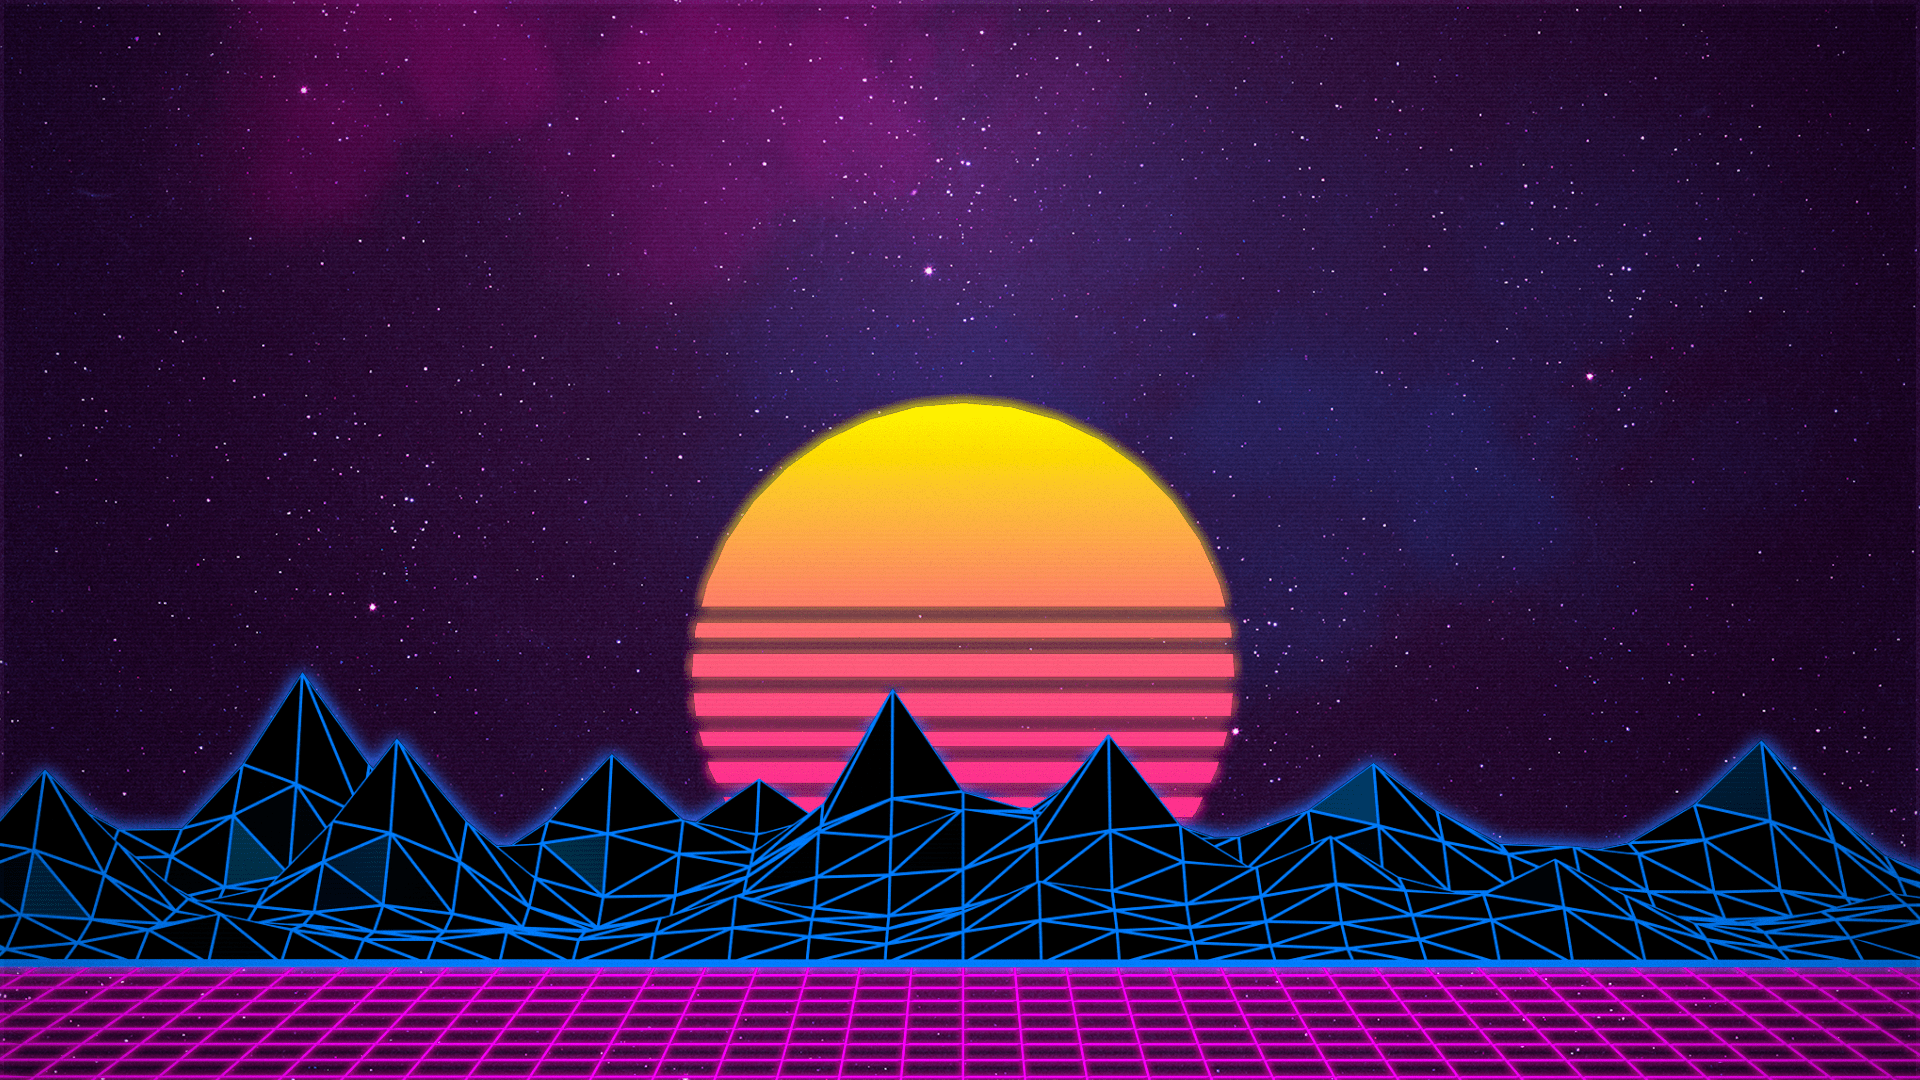 retro video game backgrounds